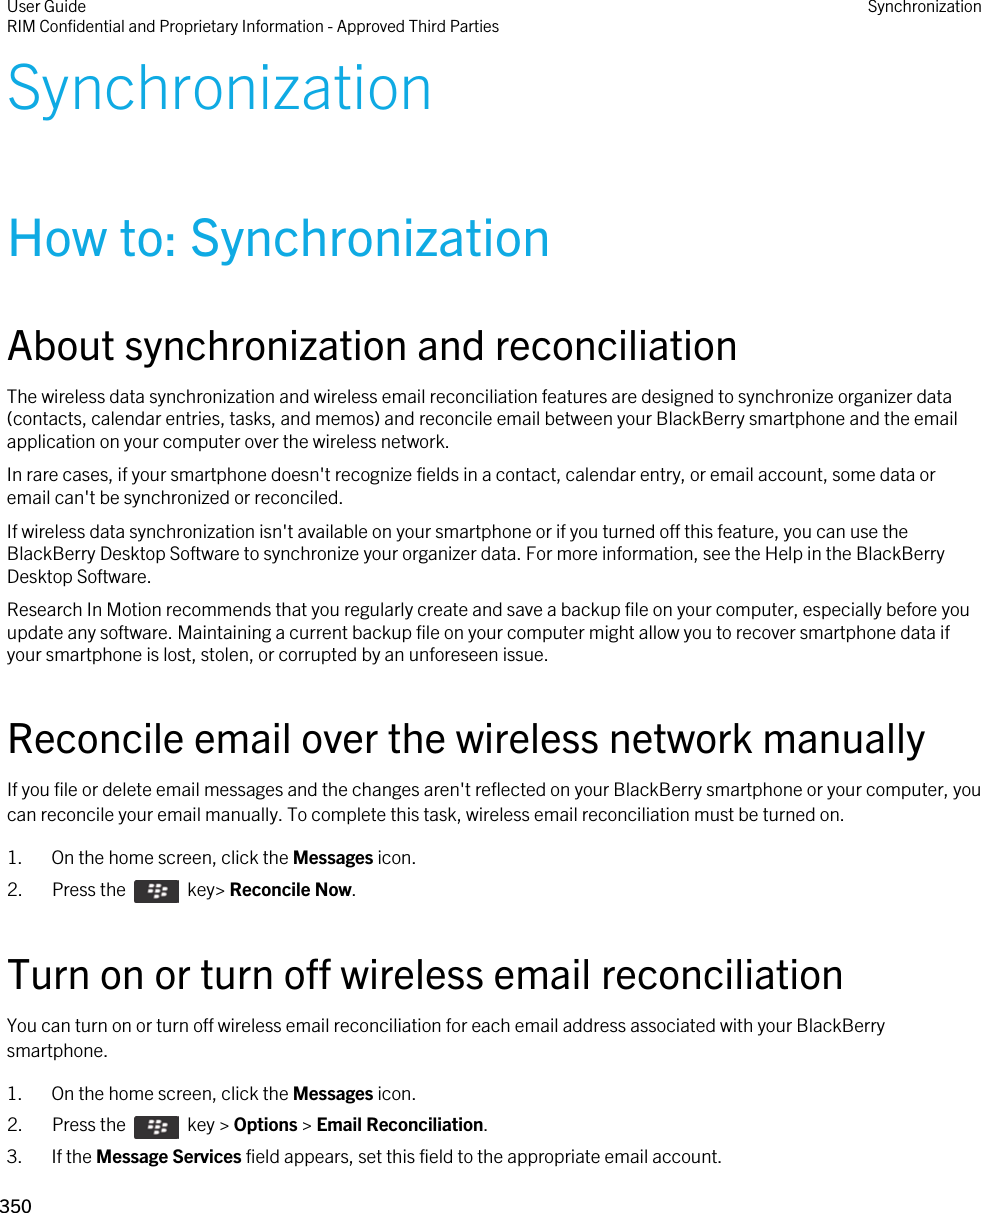 SynchronizationHow to: SynchronizationAbout synchronization and reconciliationThe wireless data synchronization and wireless email reconciliation features are designed to synchronize organizer data (contacts, calendar entries, tasks, and memos) and reconcile email between your BlackBerry smartphone and the email application on your computer over the wireless network.In rare cases, if your smartphone doesn&apos;t recognize fields in a contact, calendar entry, or email account, some data or email can&apos;t be synchronized or reconciled.If wireless data synchronization isn&apos;t available on your smartphone or if you turned off this feature, you can use the BlackBerry Desktop Software to synchronize your organizer data. For more information, see the Help in the BlackBerry Desktop Software.Research In Motion recommends that you regularly create and save a backup file on your computer, especially before you update any software. Maintaining a current backup file on your computer might allow you to recover smartphone data if your smartphone is lost, stolen, or corrupted by an unforeseen issue.Reconcile email over the wireless network manuallyIf you file or delete email messages and the changes aren&apos;t reflected on your BlackBerry smartphone or your computer, you can reconcile your email manually. To complete this task, wireless email reconciliation must be turned on.1. On the home screen, click the Messages icon.2.  Press the    key&gt; Reconcile Now.Turn on or turn off wireless email reconciliationYou can turn on or turn off wireless email reconciliation for each email address associated with your BlackBerry smartphone.1. On the home screen, click the Messages icon.2.  Press the    key &gt; Options &gt; Email Reconciliation. 3. If the Message Services field appears, set this field to the appropriate email account.User GuideRIM Confidential and Proprietary Information - Approved Third Parties Synchronization350 